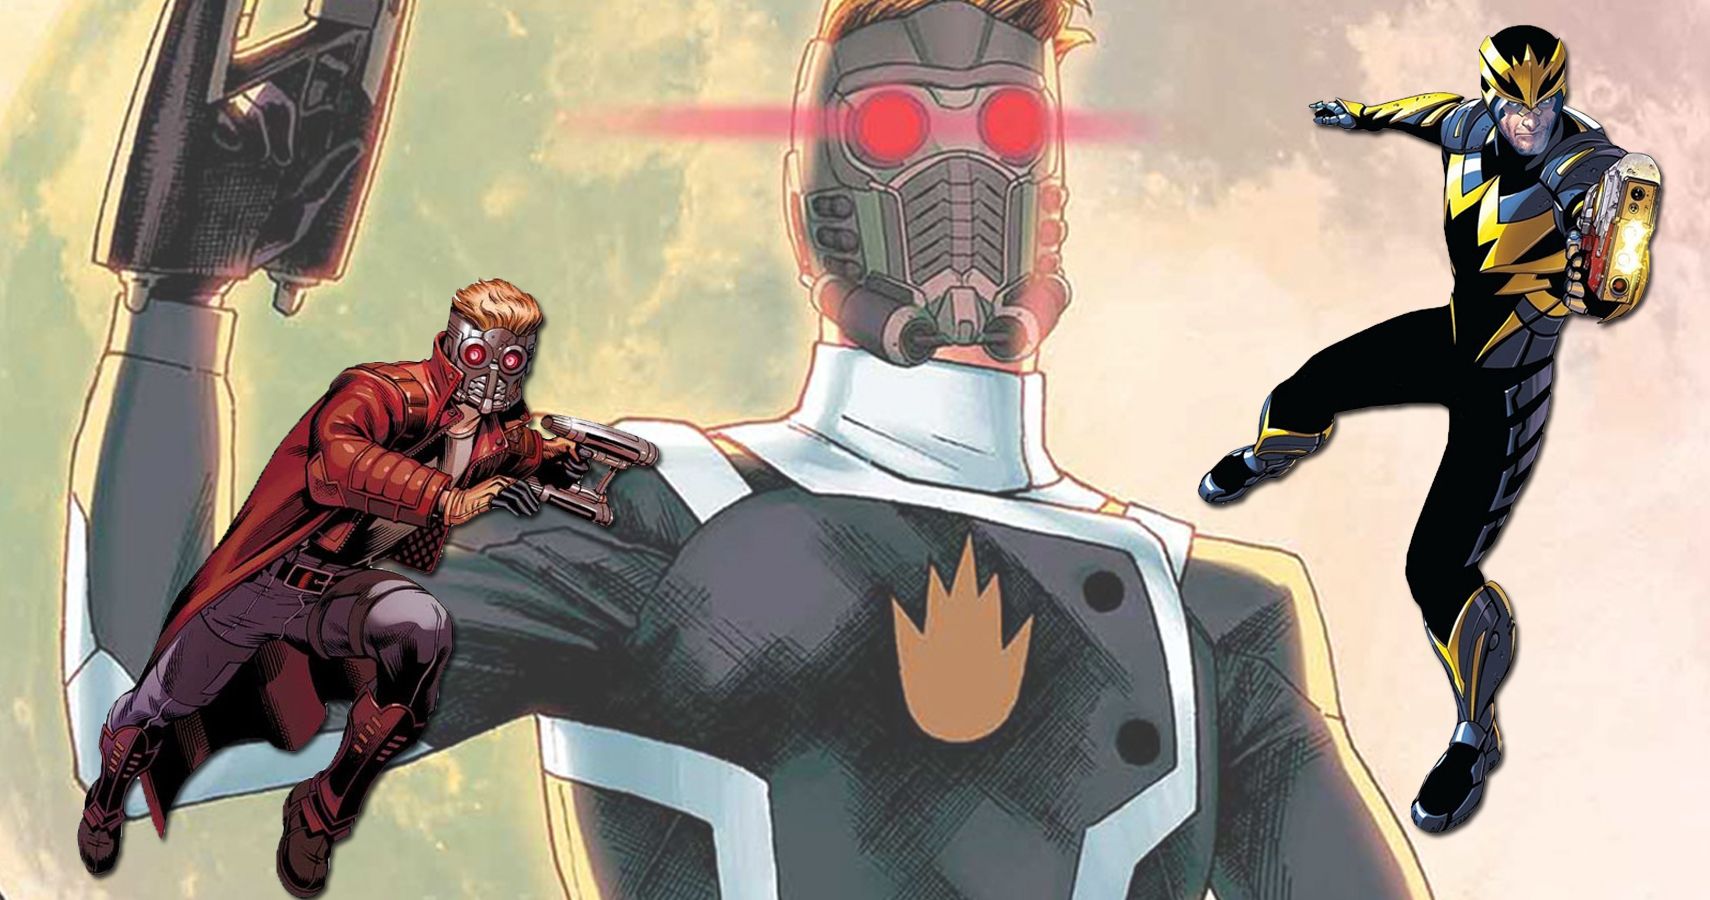 Star-Lord: 5 Best Costumes (& The 5 Worst)